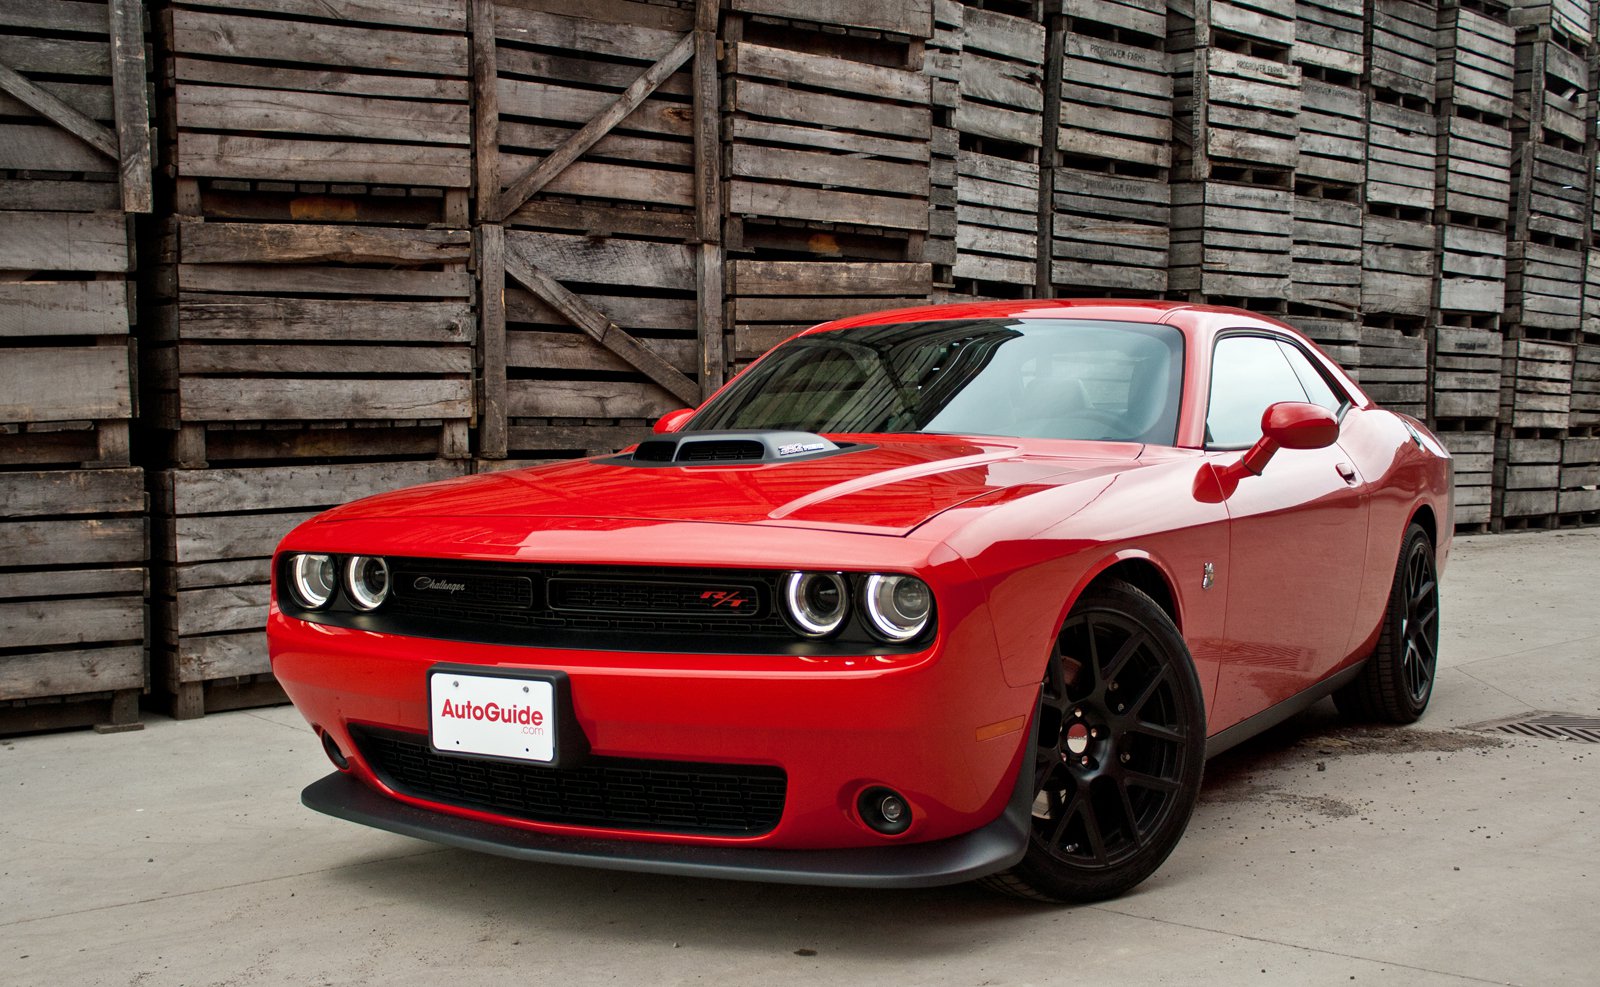 Dodge Challenger Pics, Vehicles Collection